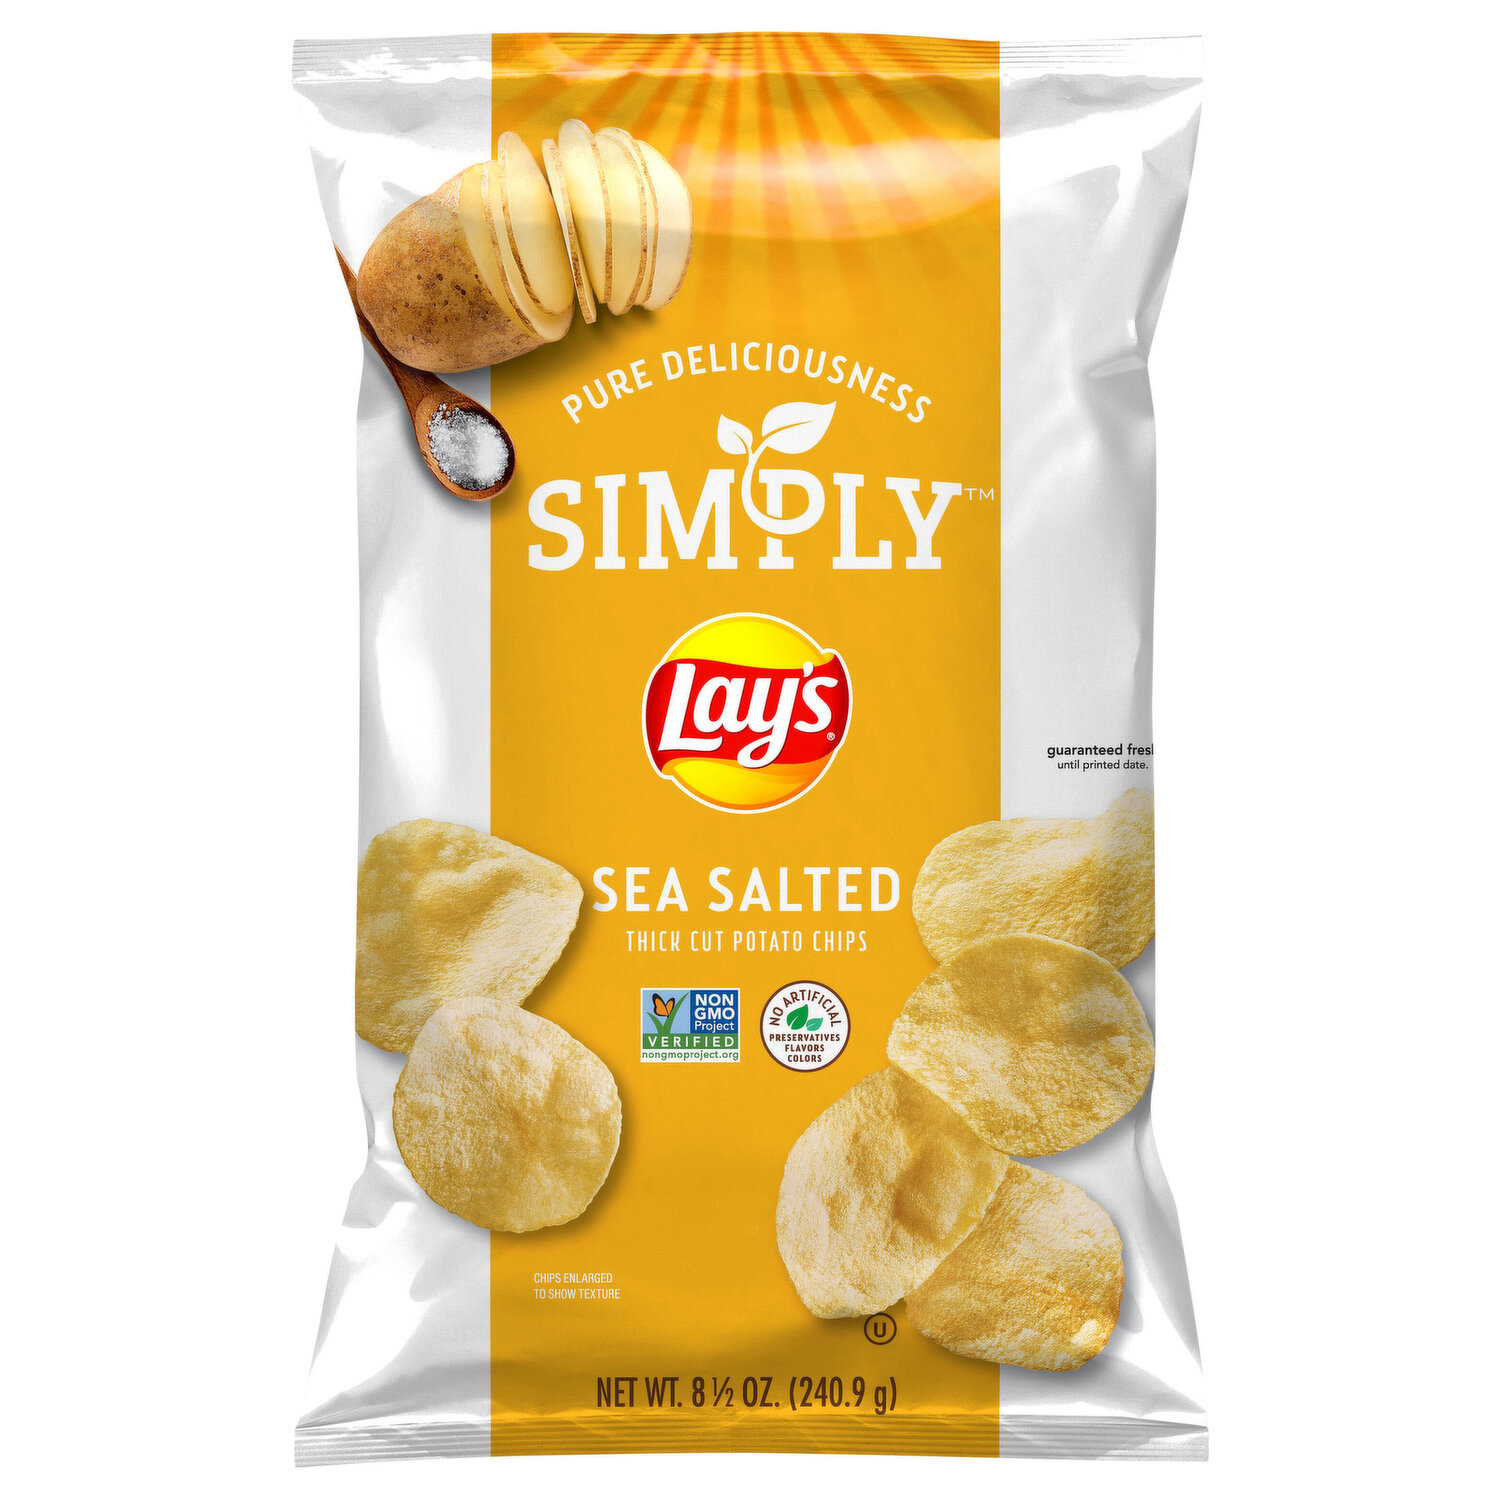 Lay's Potato Chips, Sea Salted, Thick Cut - Super 1 Foods